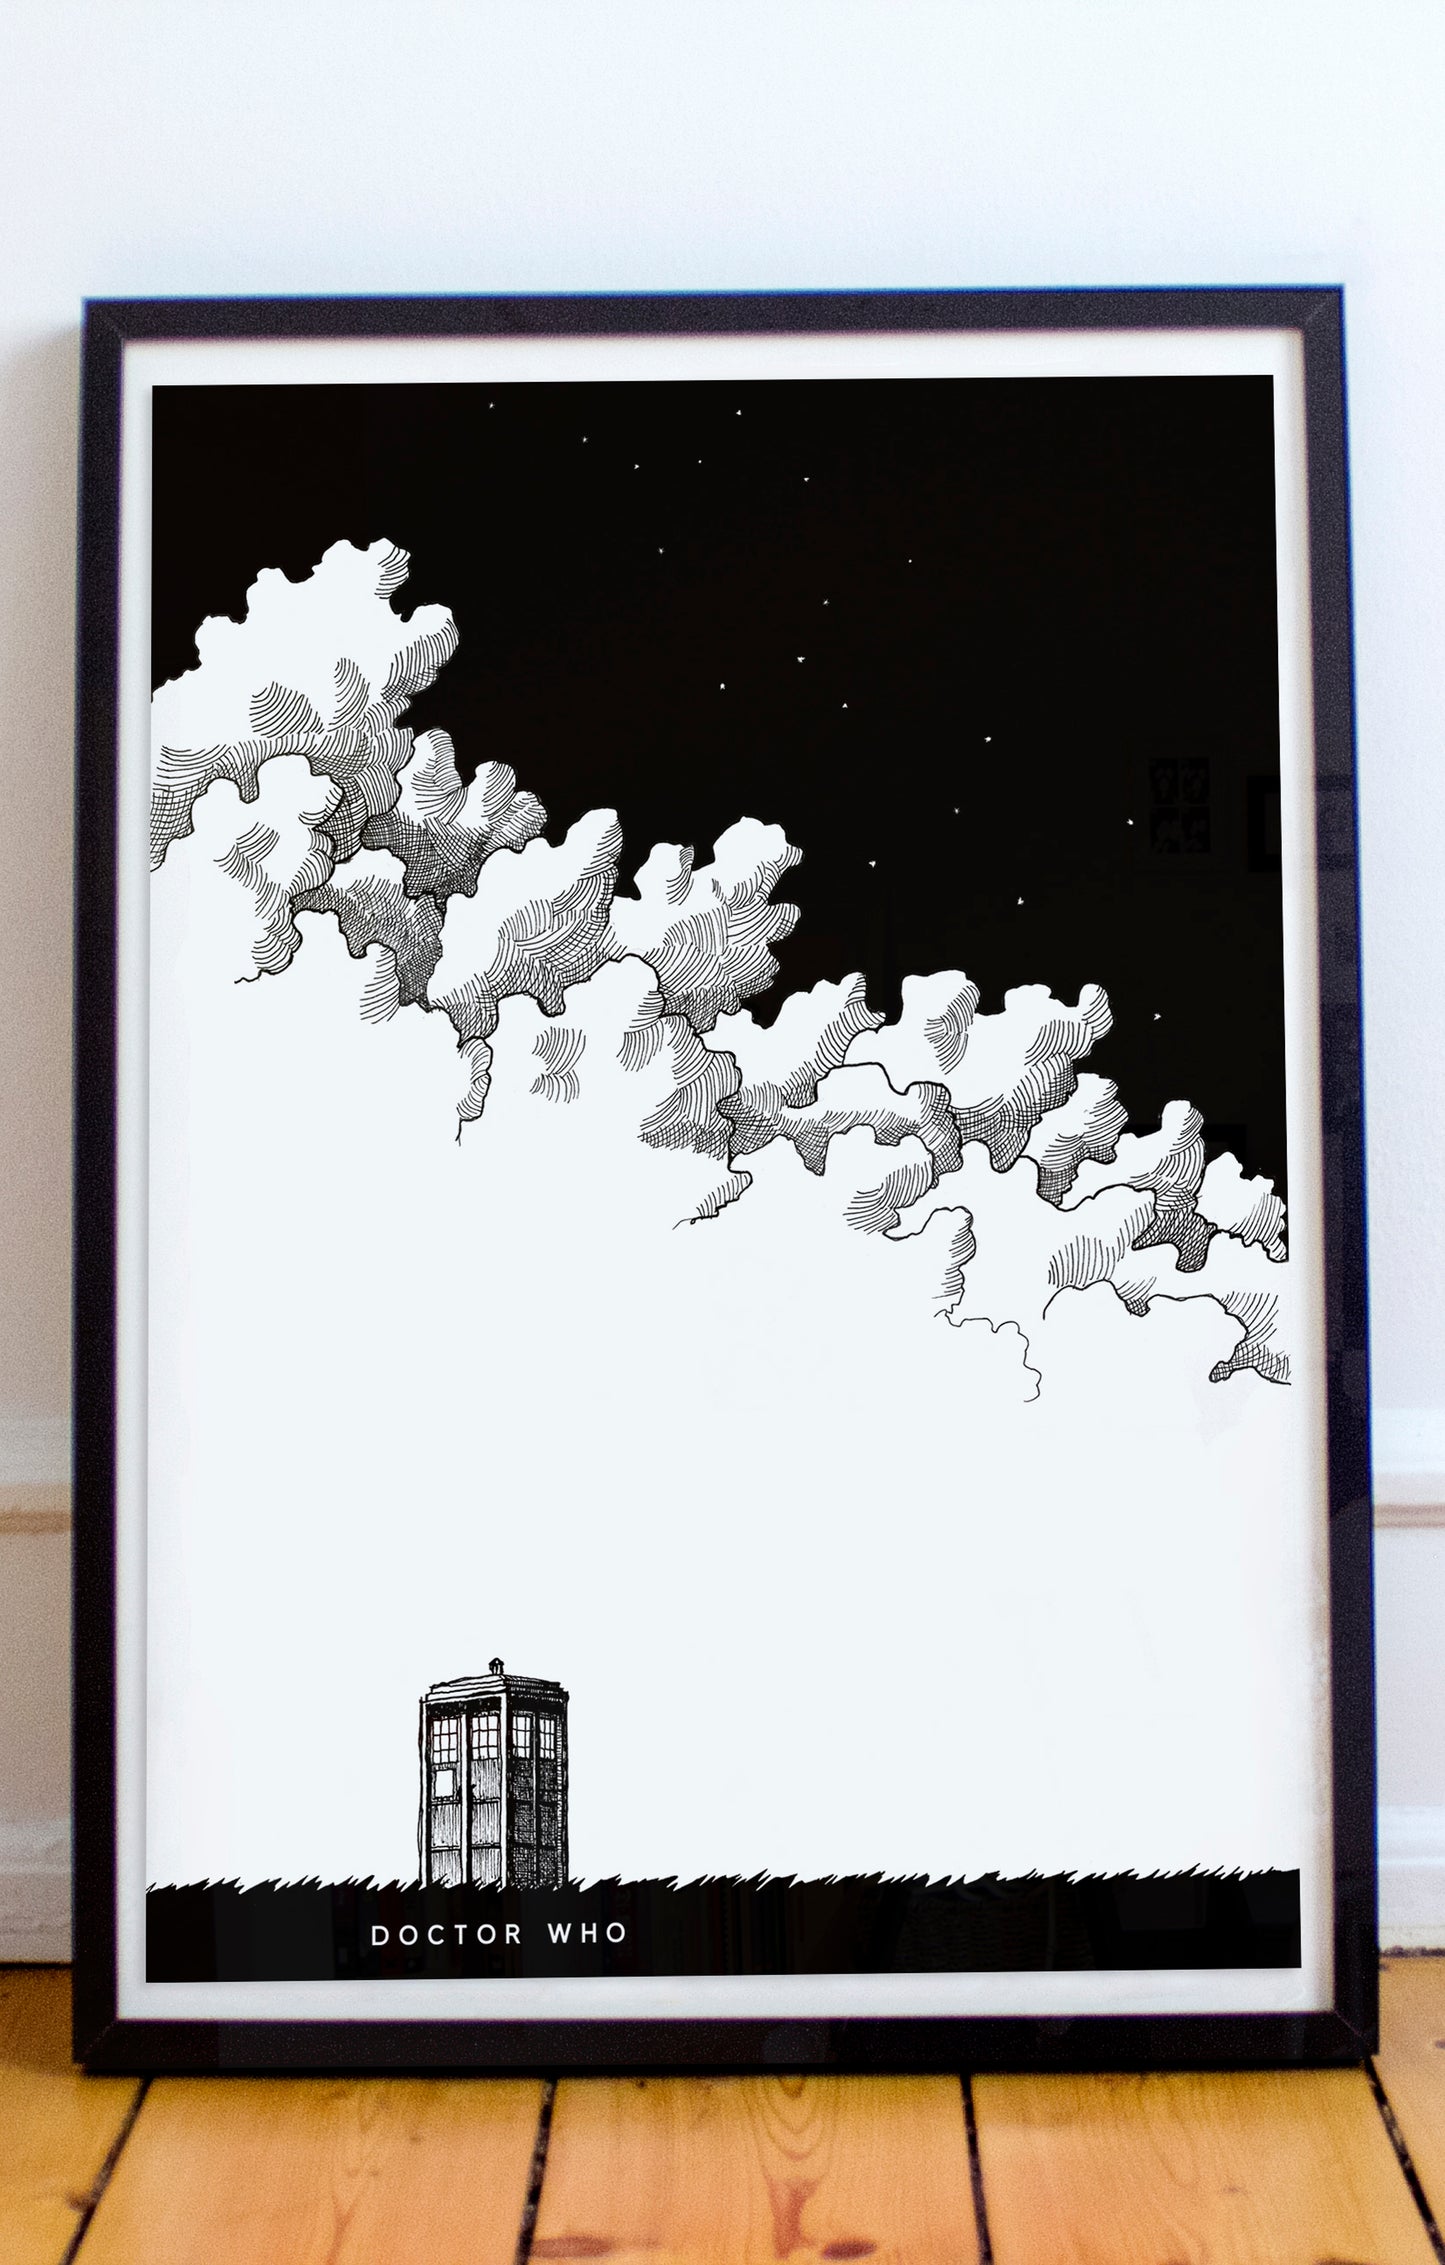 Doctor Who Poster - The Tardis